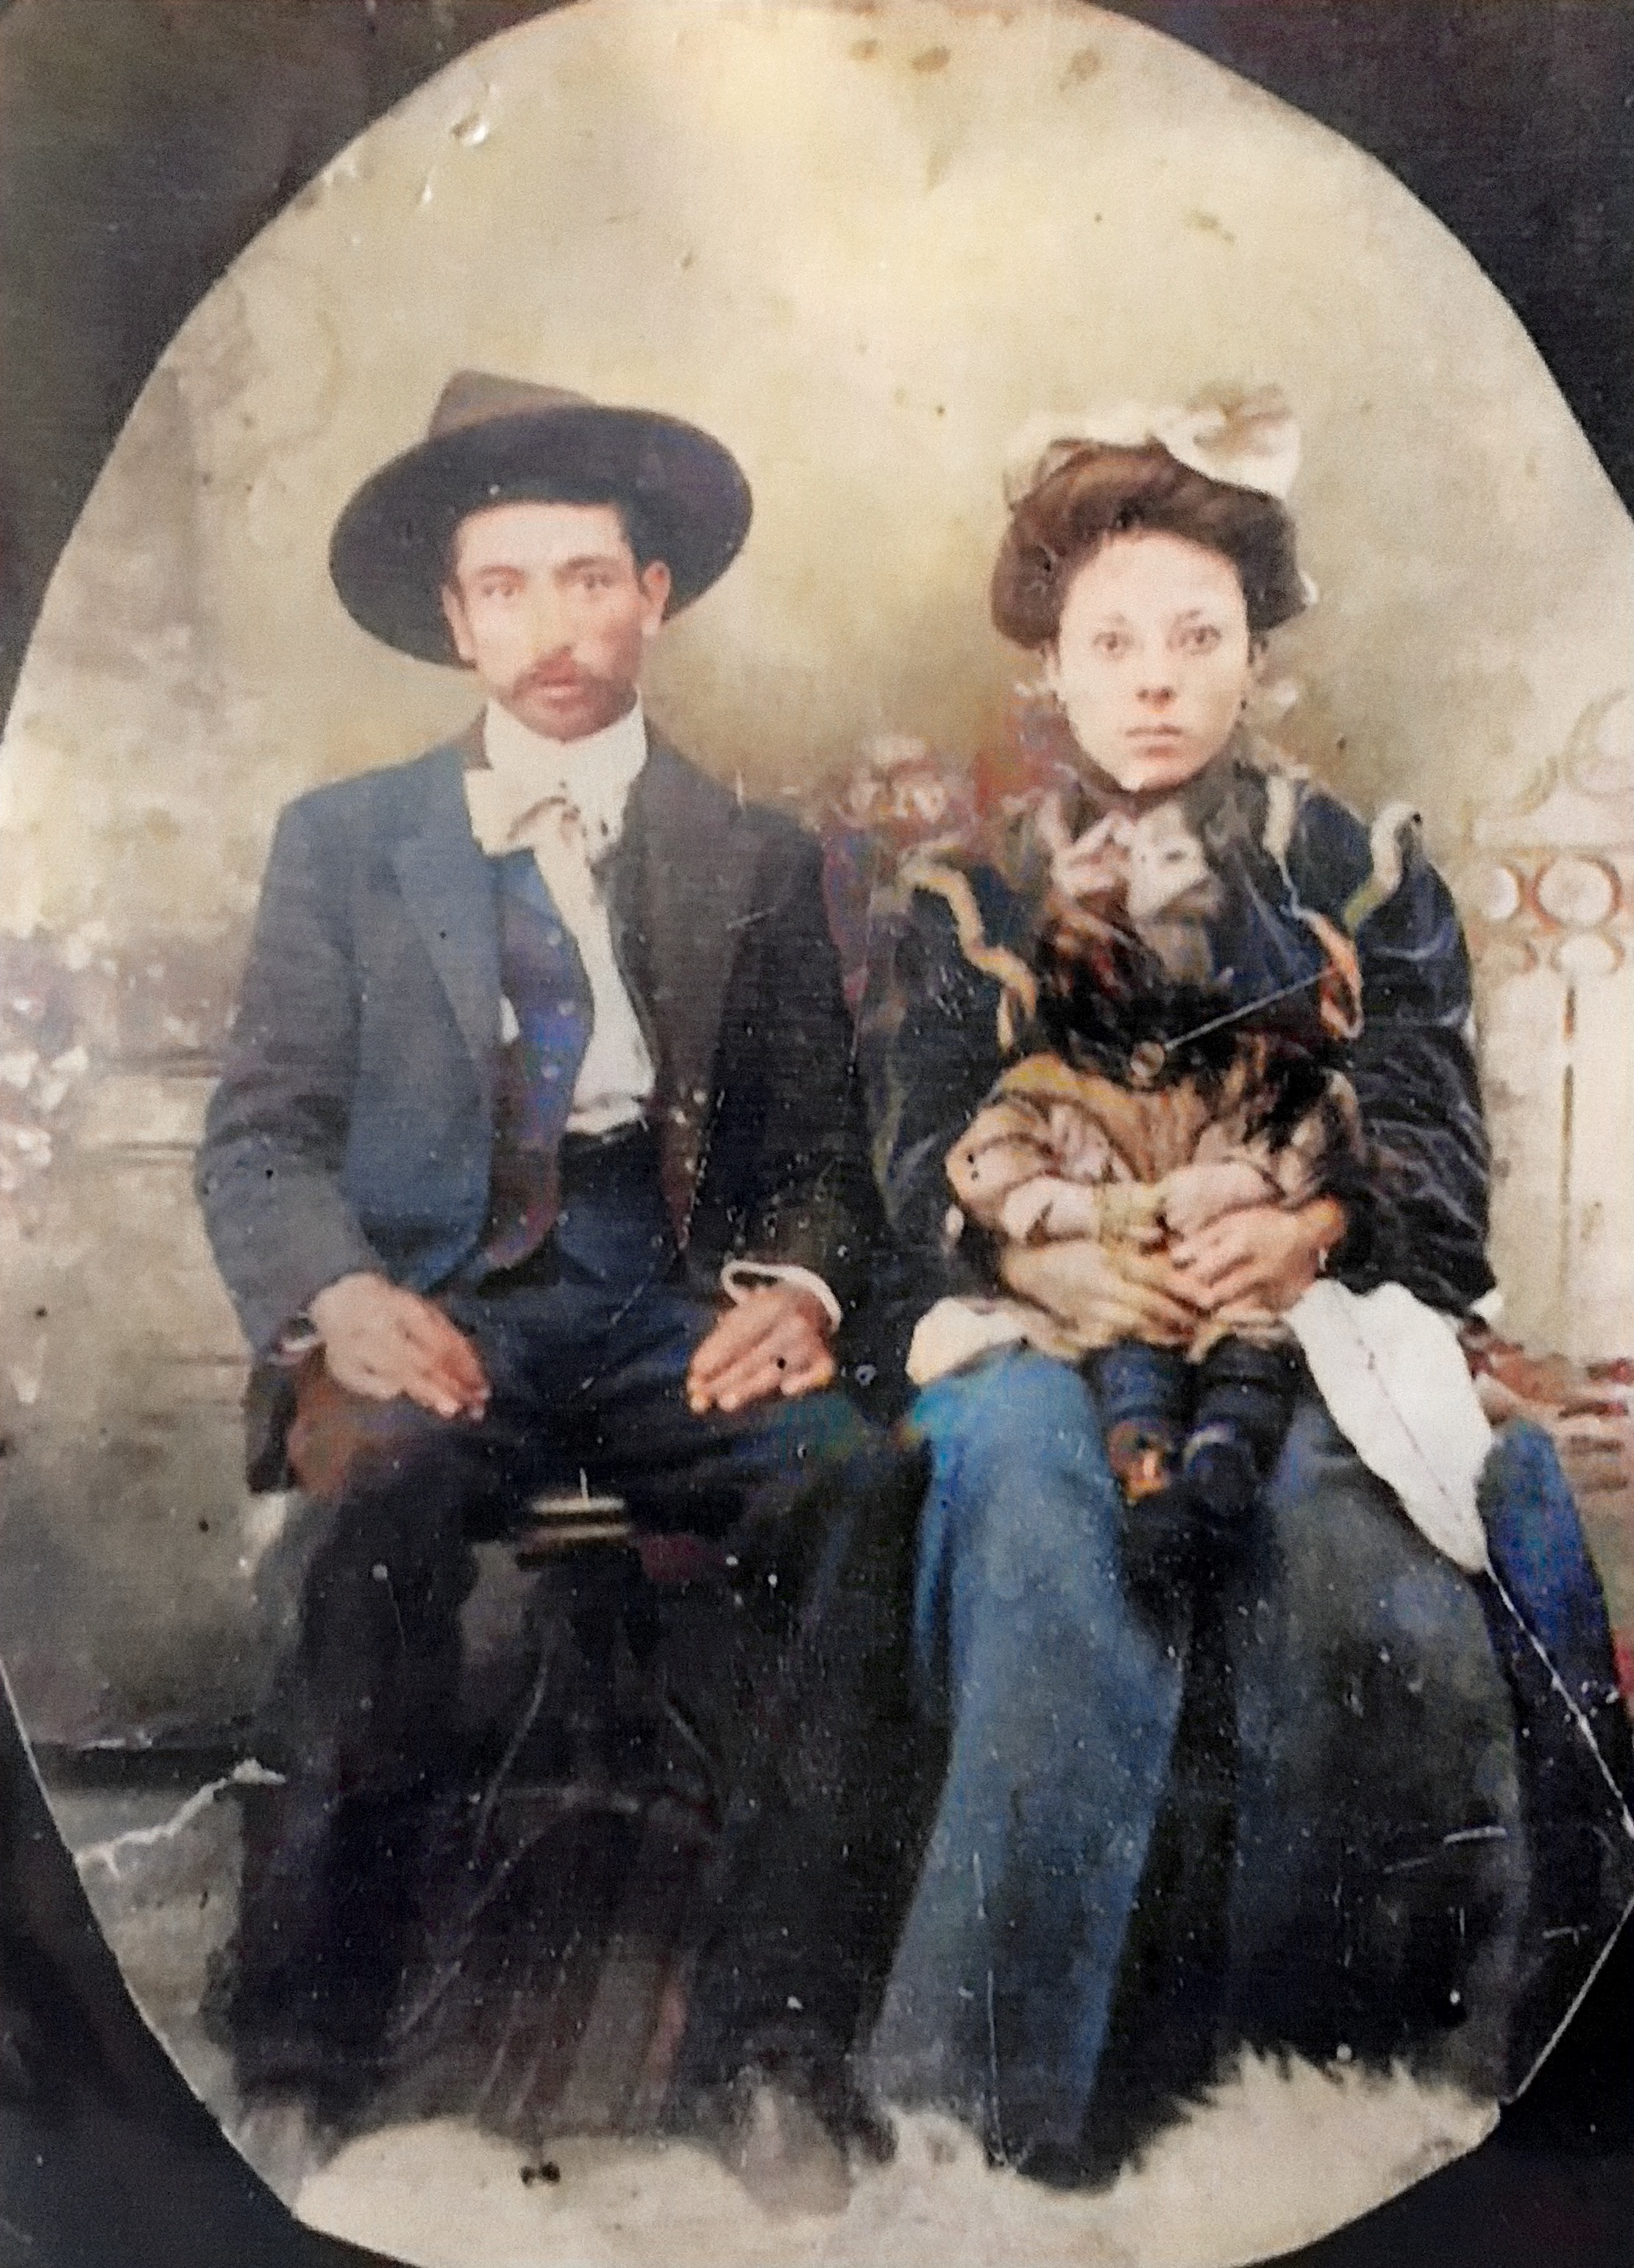 this is my great great grandma and grandpa 1912 maybe?